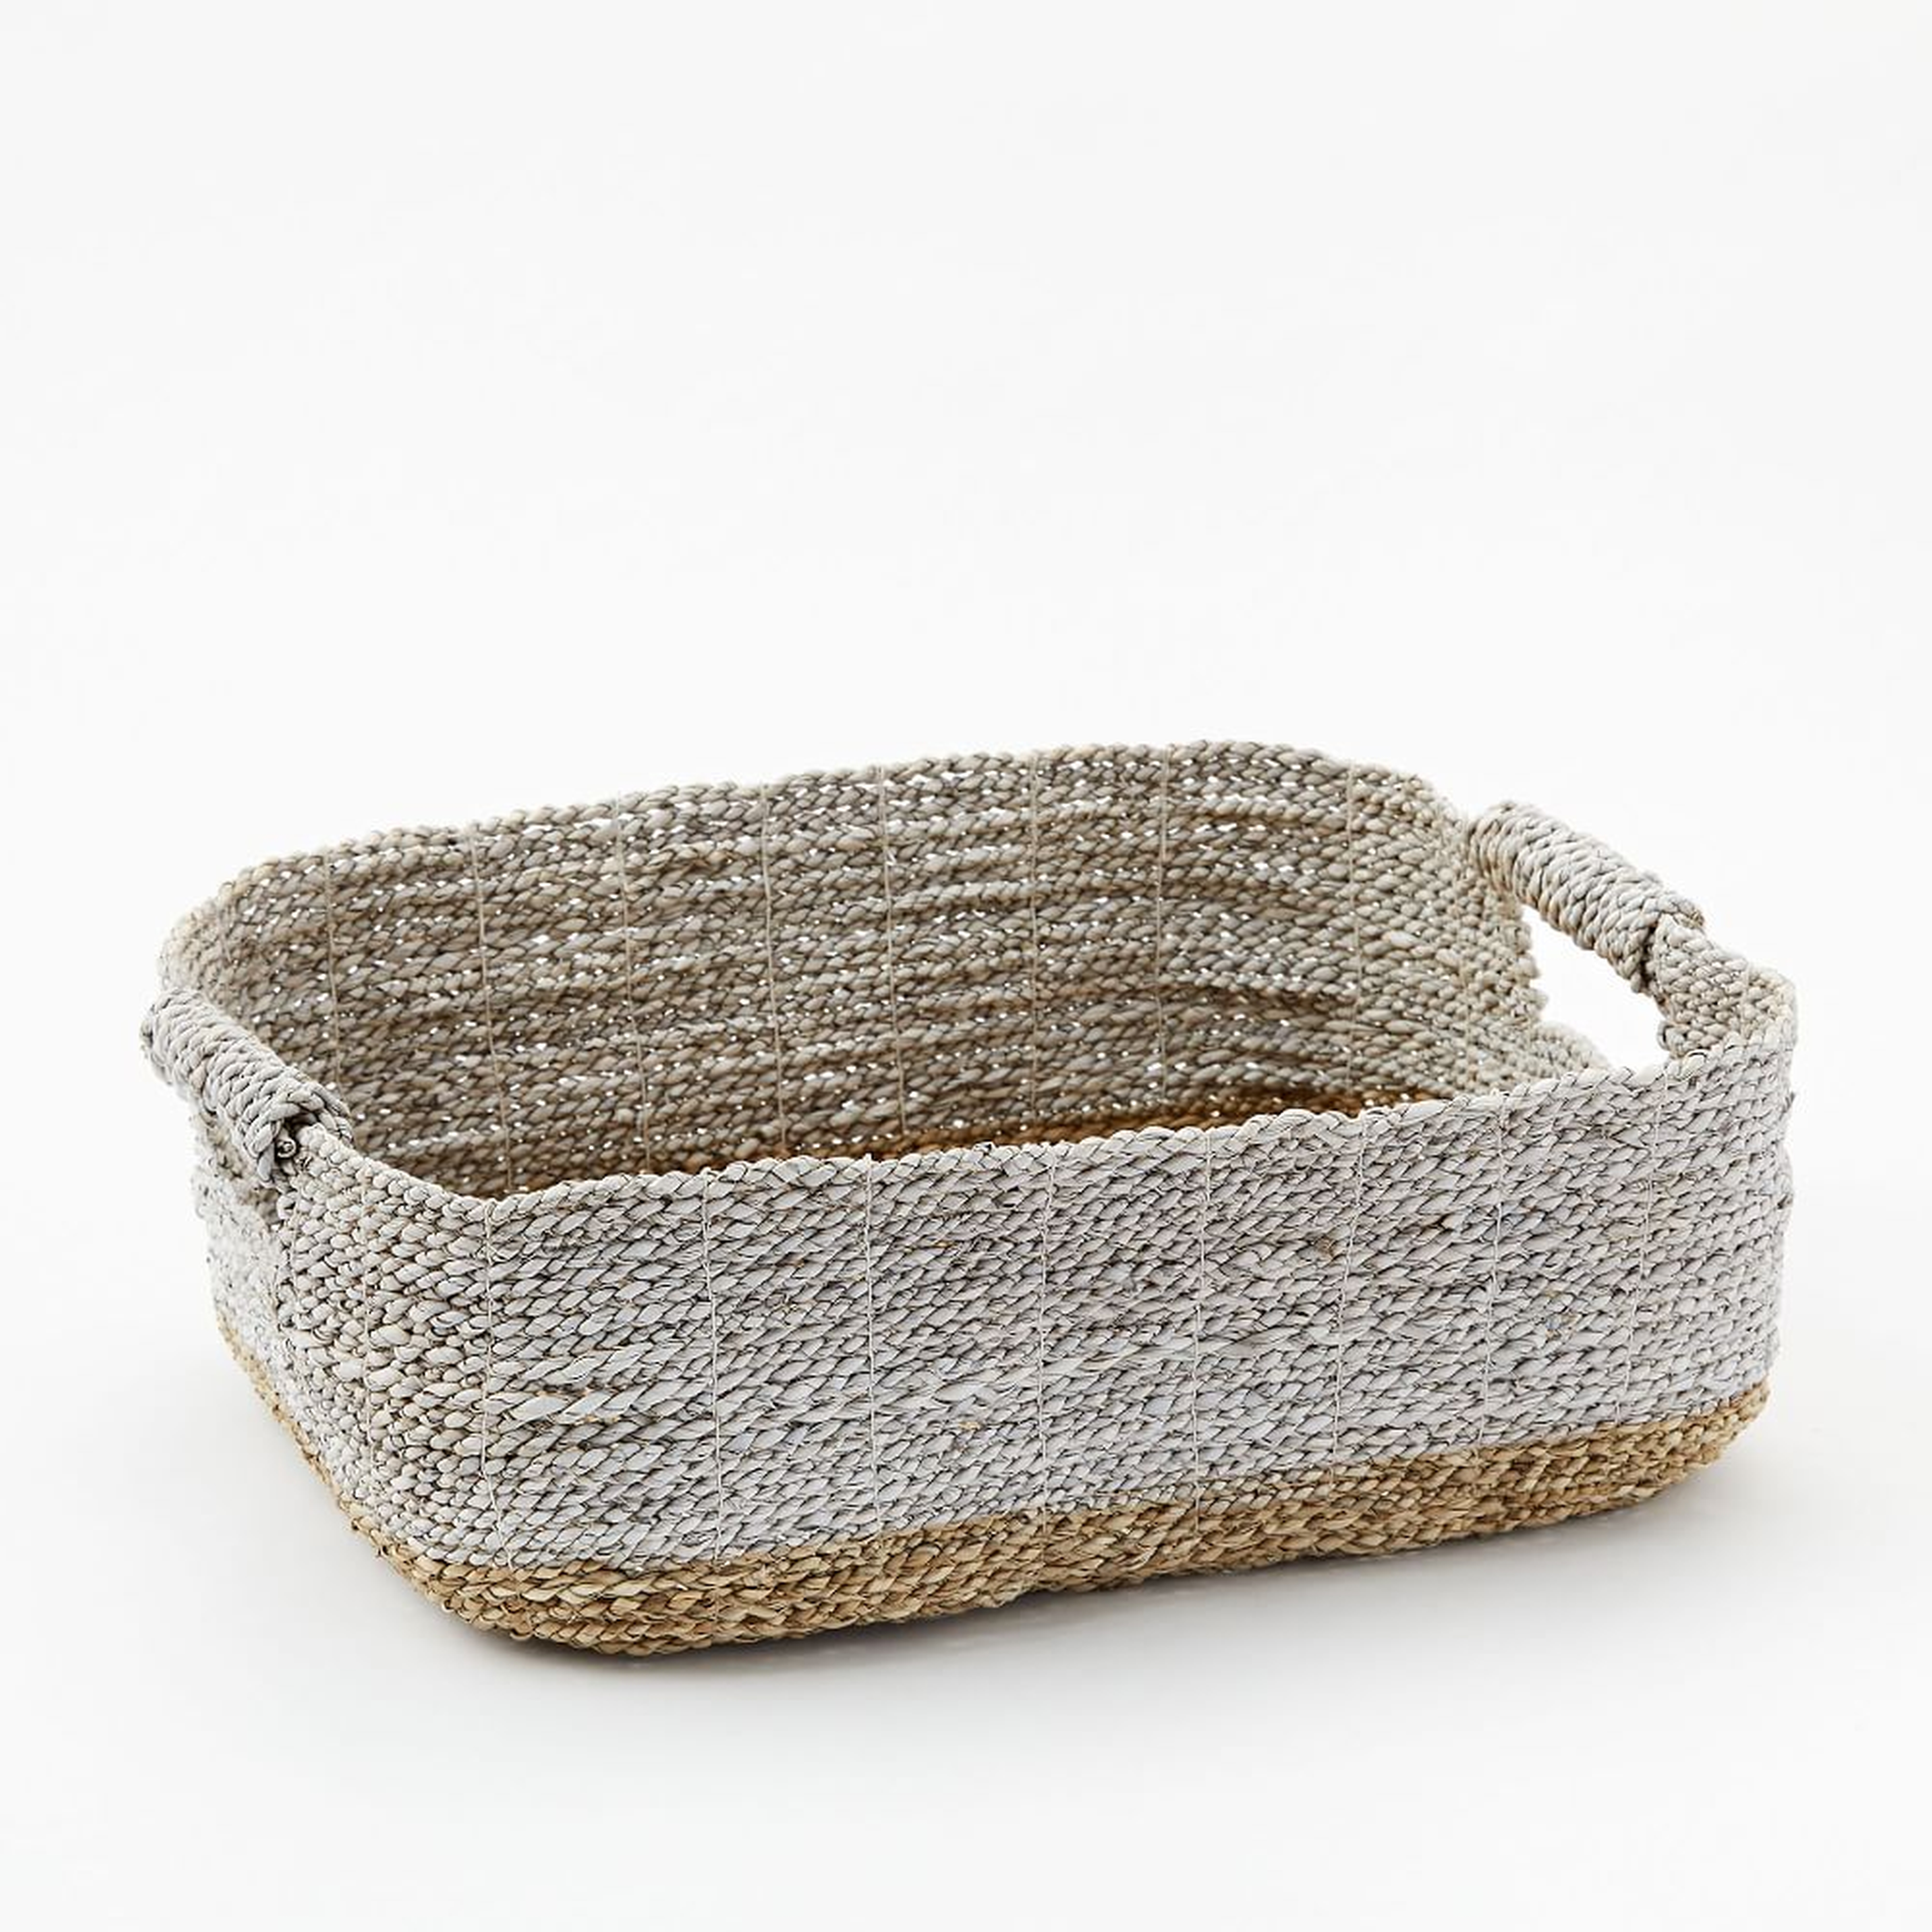 Two-Tone Woven Baskets, Natural/White, Underbed Basket, 19.25"W x 14.25"D x 6"H - West Elm